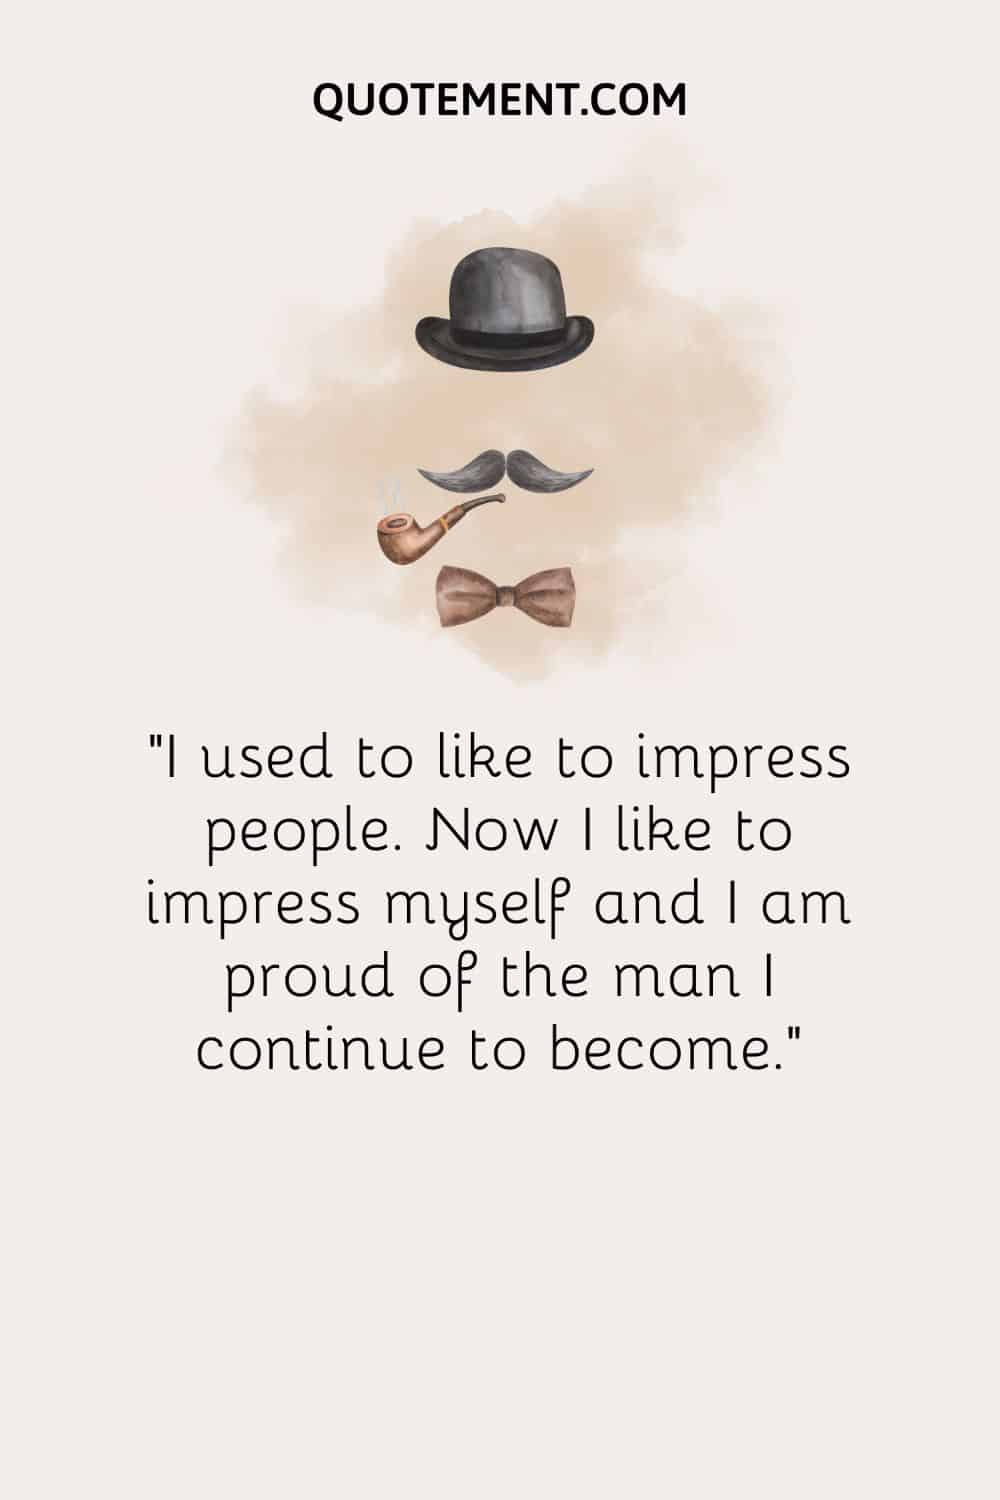 image of a hat, mustache, pipe, and bow representing words of affirmation for men